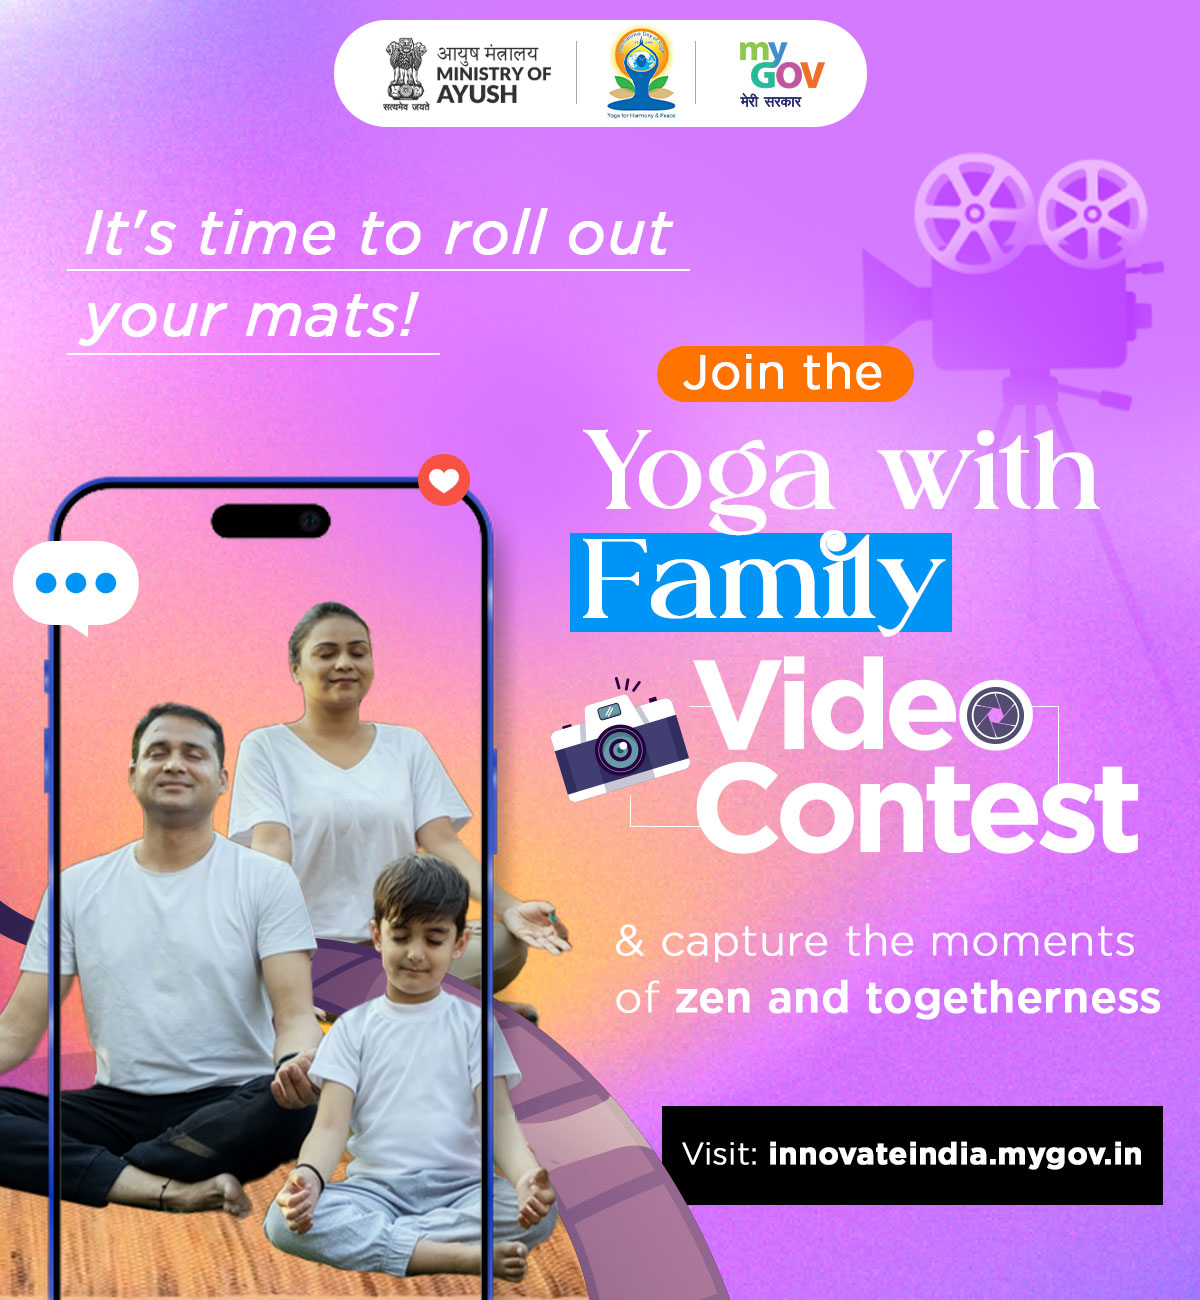 Yoga with Family Video Contest